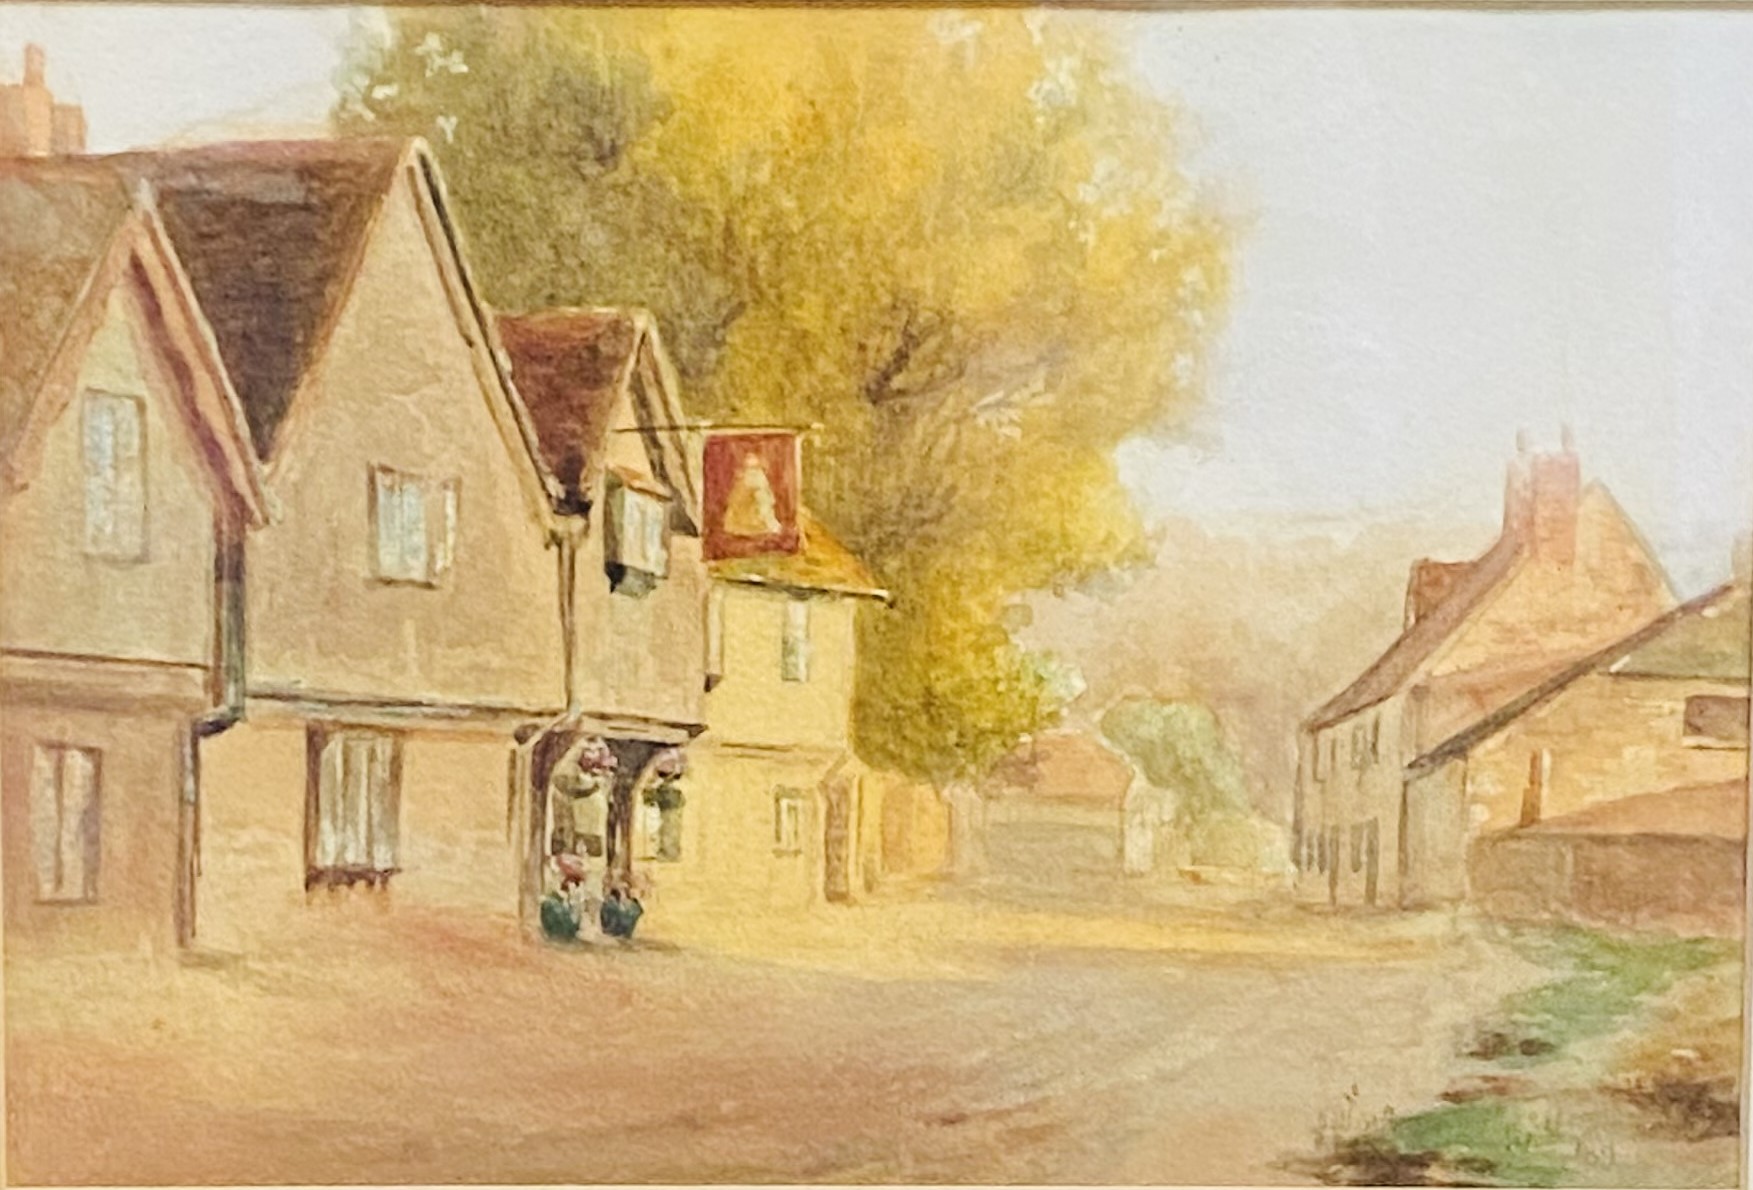 Framed and glazed watercolour of a village scene